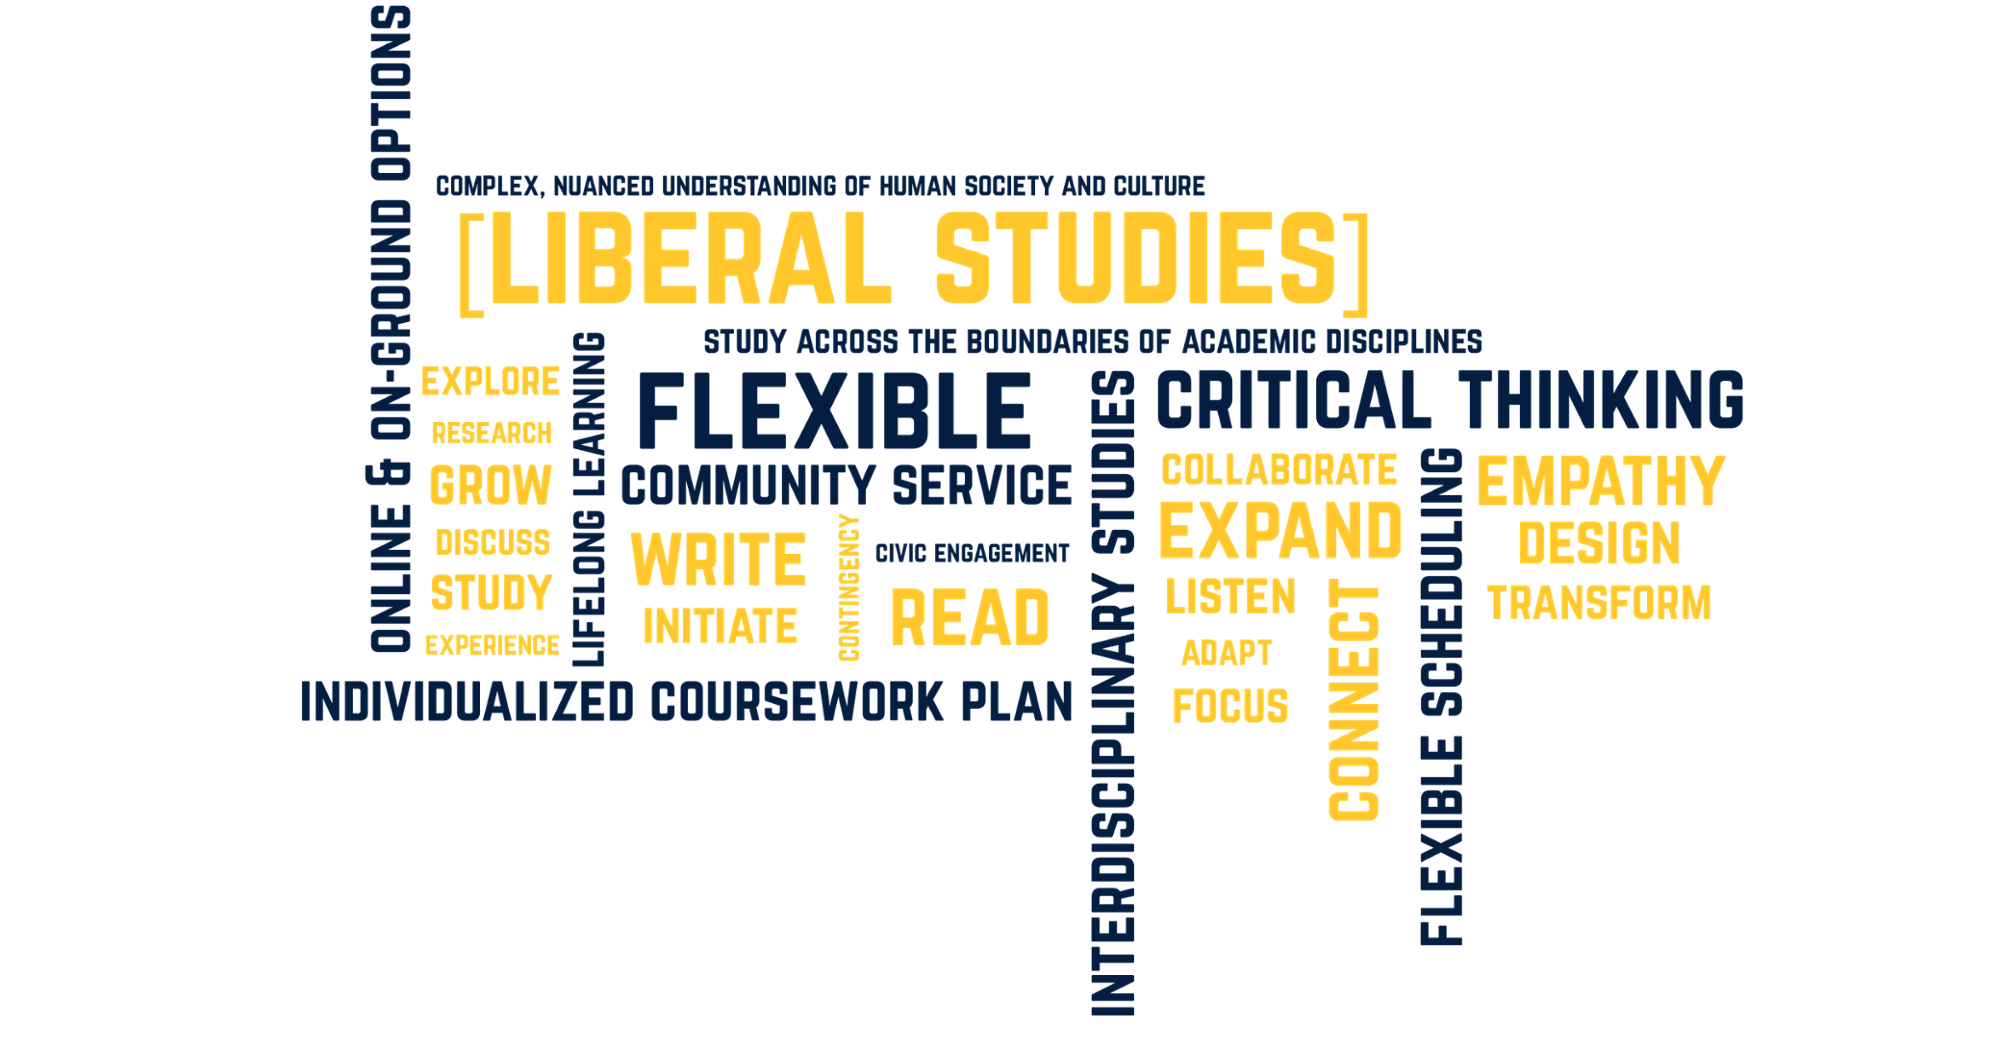 Liberal Studies: Complex, nuanced understanding of human society and culture; study across the boundaries of academic disciplines; individualized coursework plan; civic engagement; inetrdisciplinary studies; critical thinking; lifelong learning; flexible scheduling; online and on-ground options; explore; research; growth; discussion; study; experience; community service; skills; adaptability; education; read; collaborate; listen; expand; initiative; focus; connect.